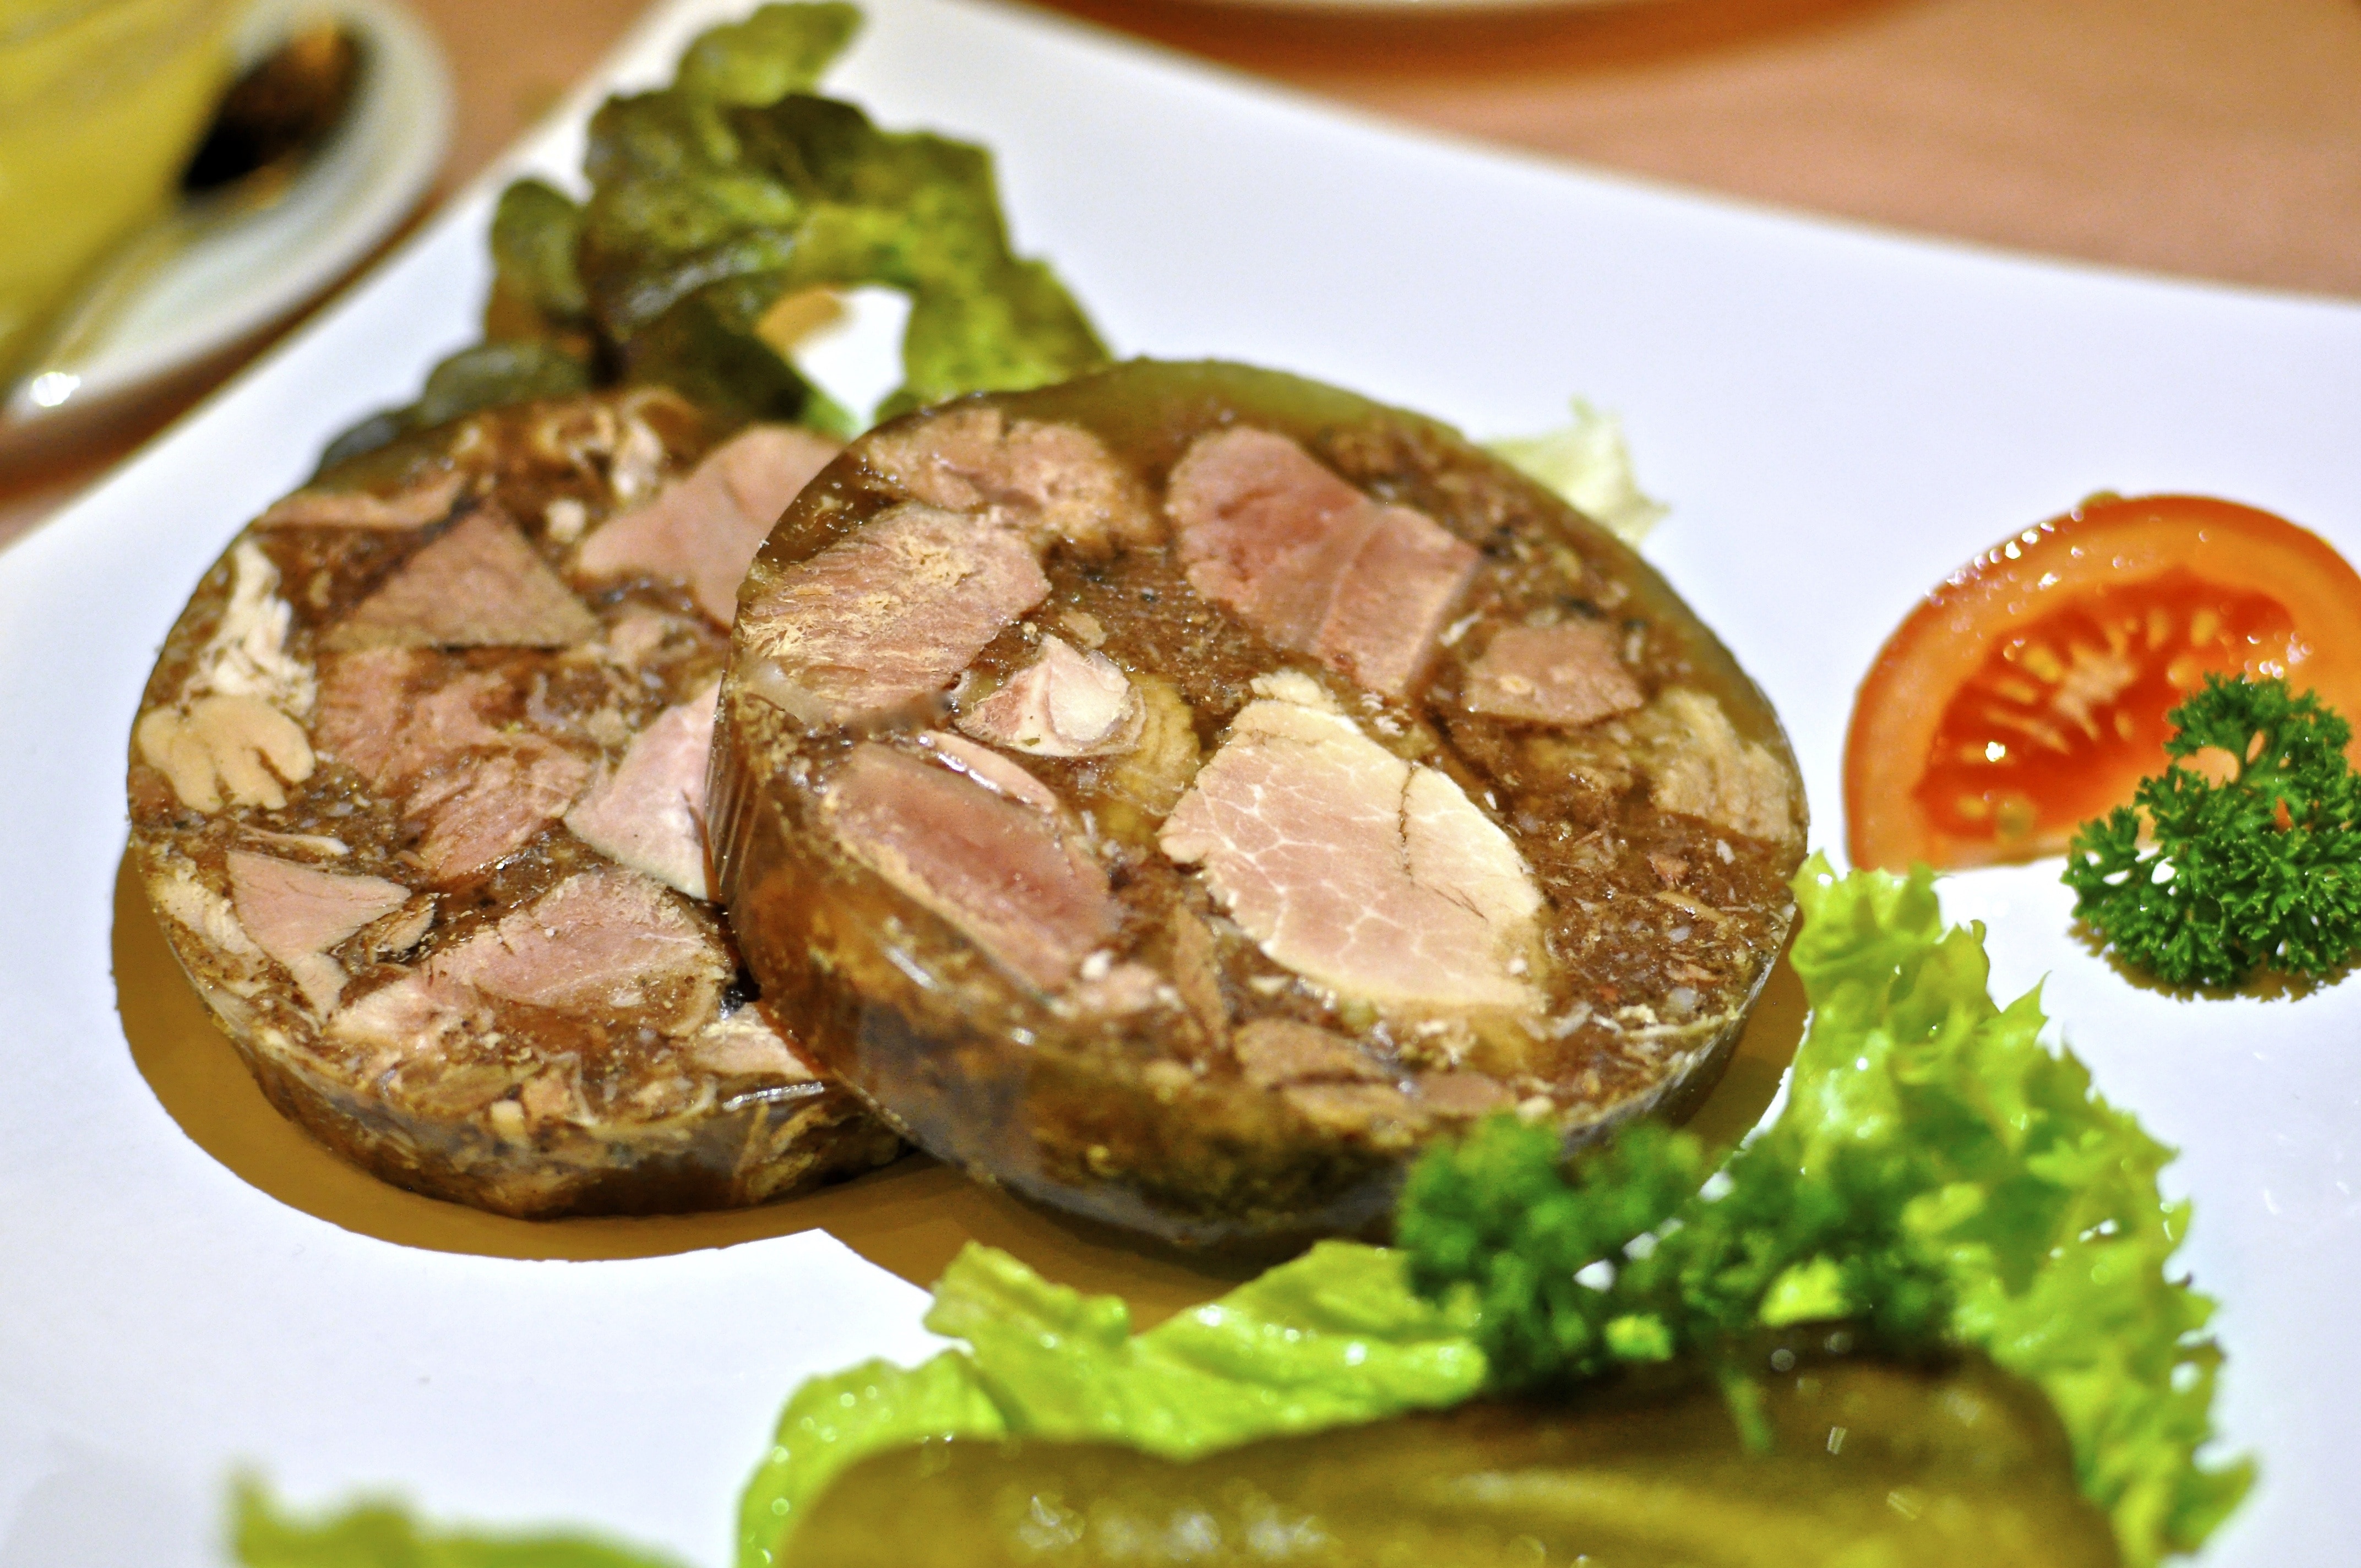 two meat dishes with green leafy vegetable and sliced tomato on white ceramic plate